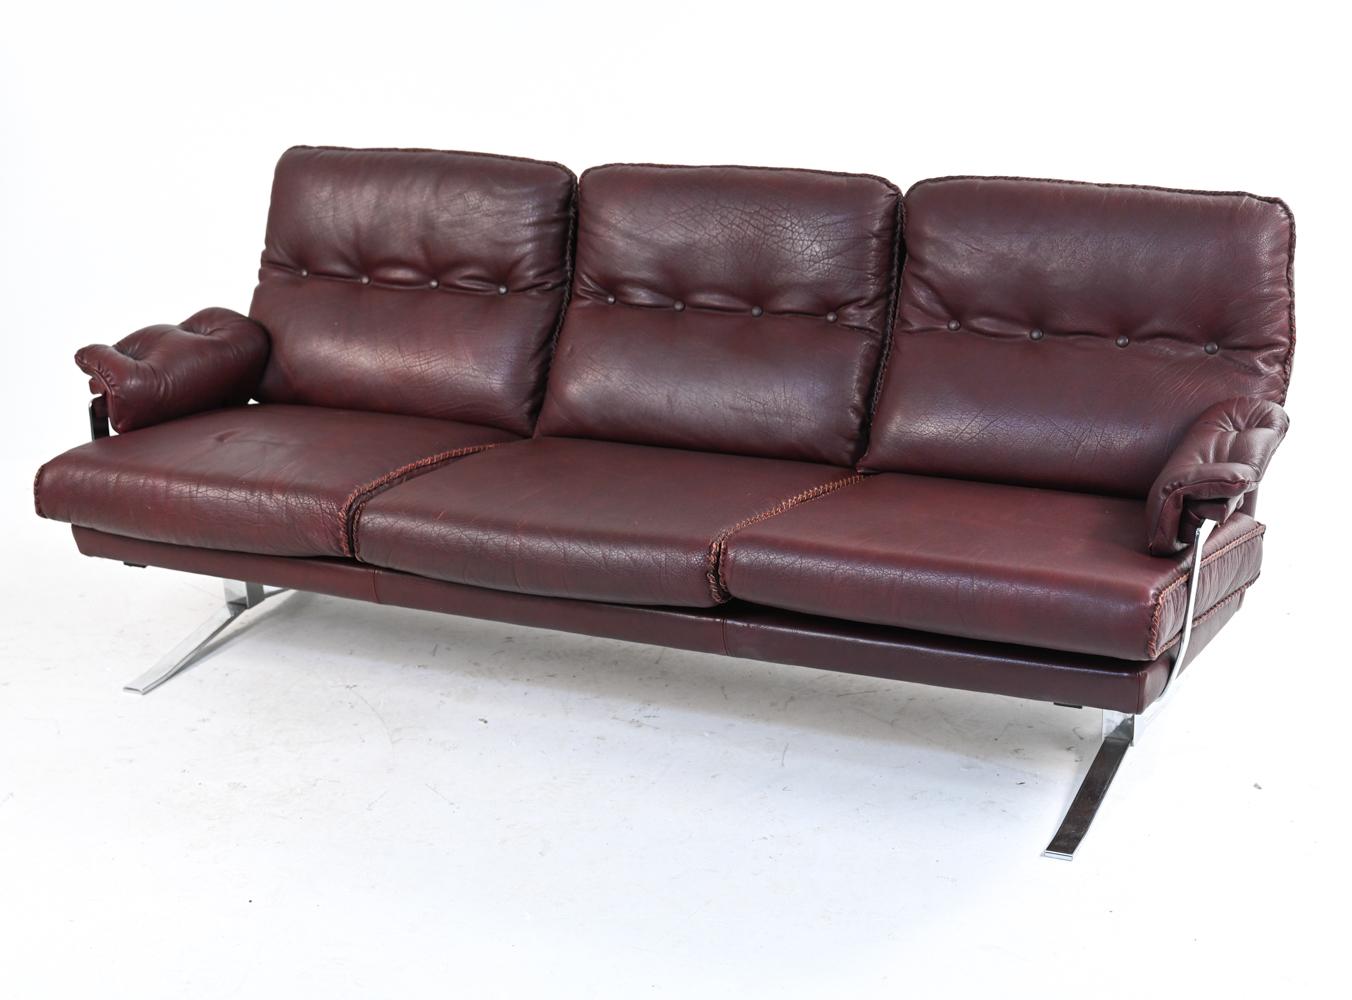 Steel Arne Norell Chrome & Buffalo Leather Sofa Suite, c. 1960's